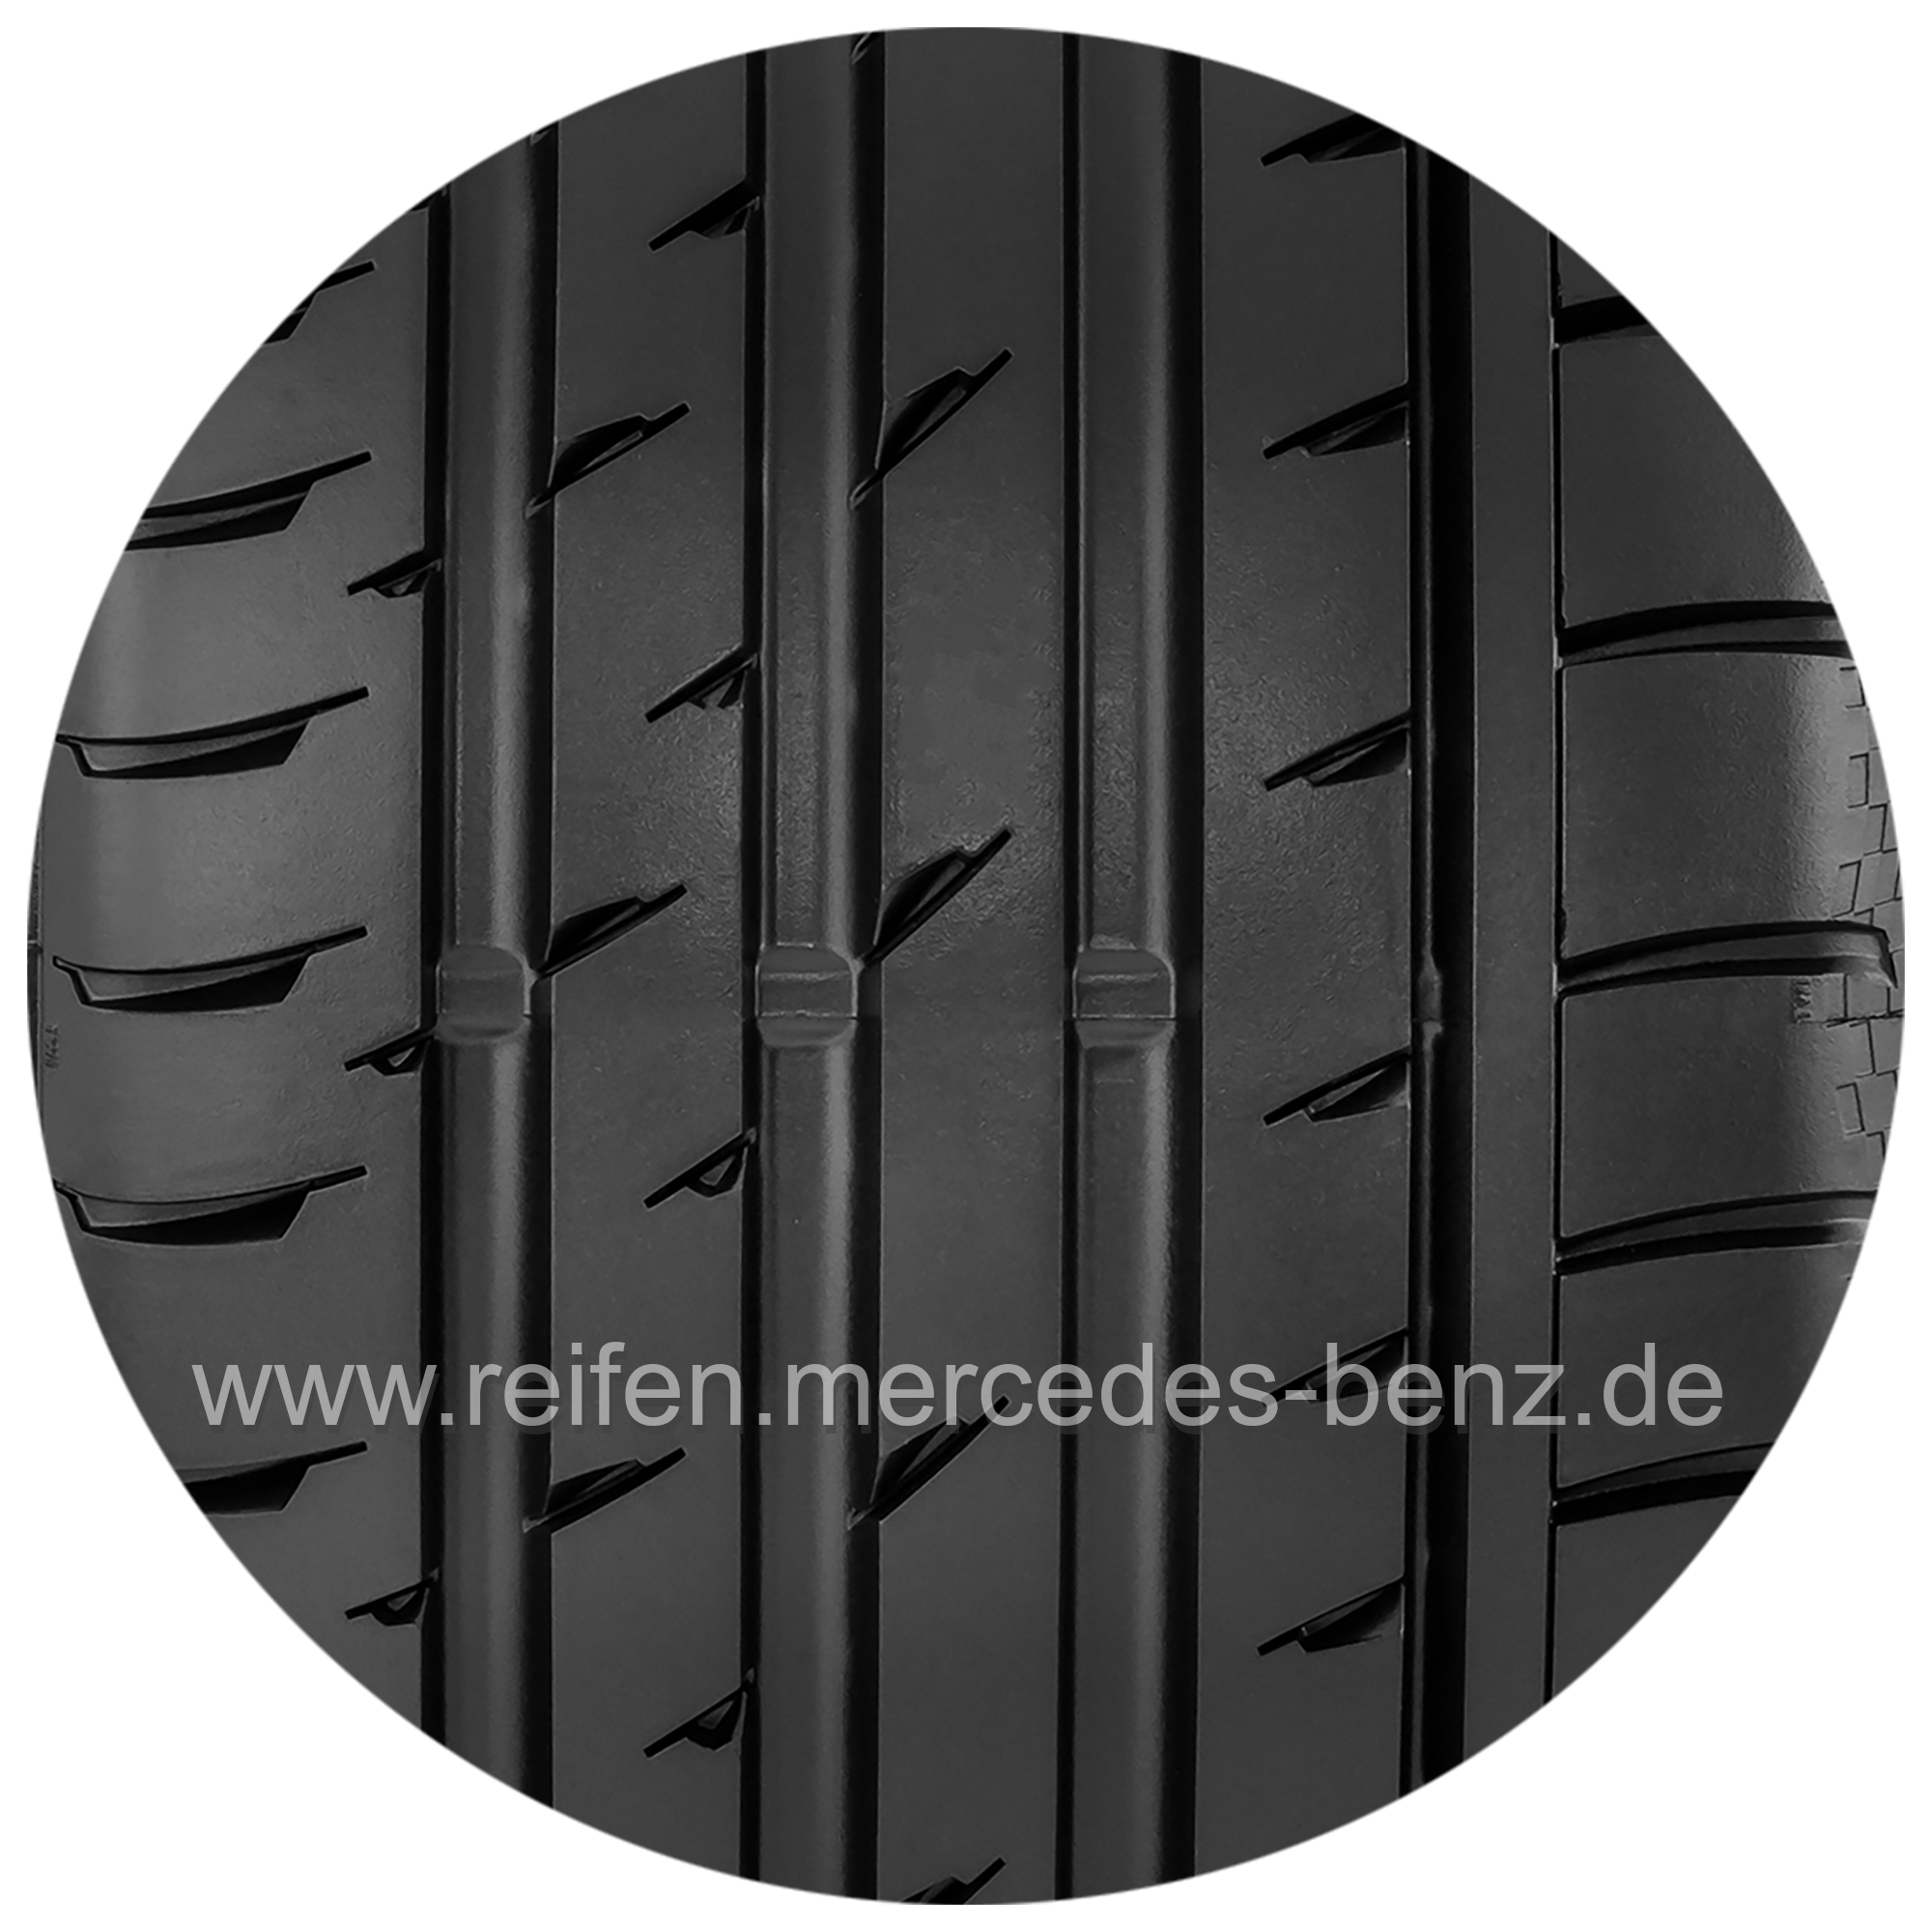 Continental ContiSportContact 3 MO, Continental, ContiSportContact 3 MO, 245/40 R18 97Y XL, Sommer, Q44001111226A